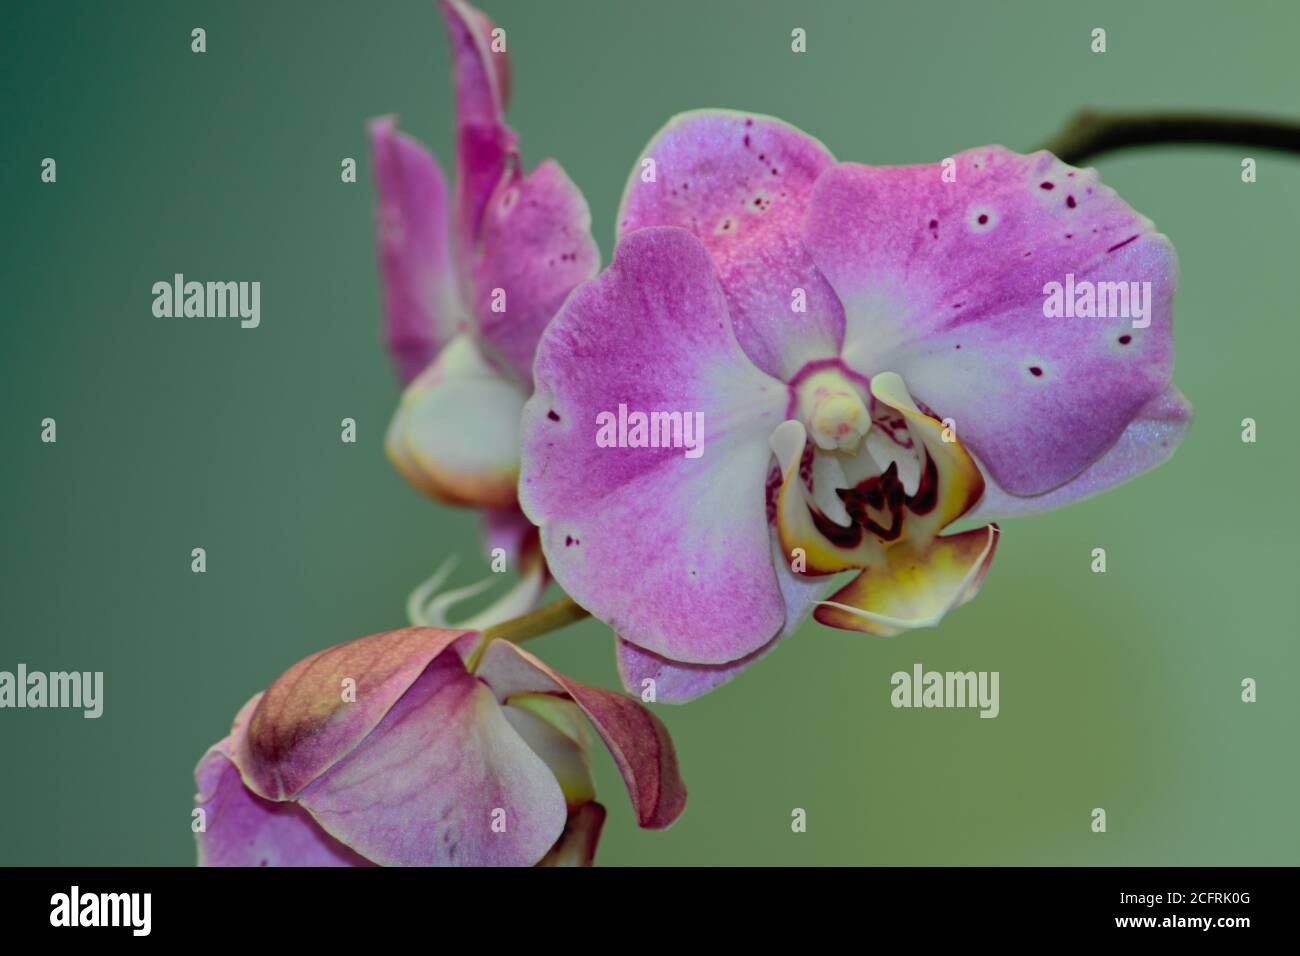 orchid branch with purple flowers and yellow center, under a greenish background. Stock Photo